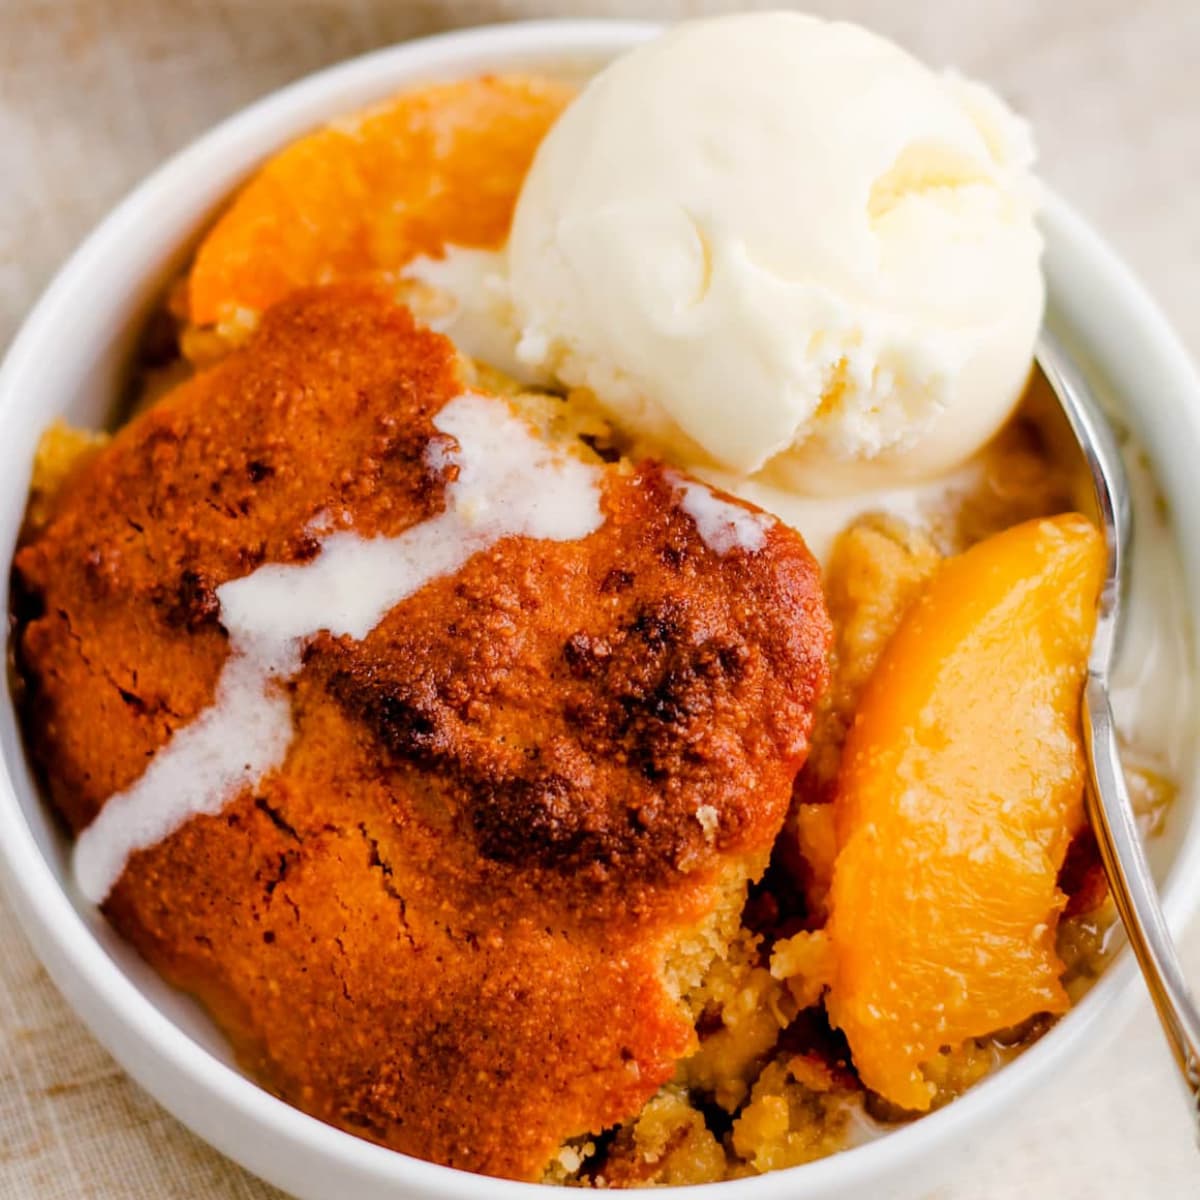 a bowl of peach cobbler with a scoop of ice cream on top.